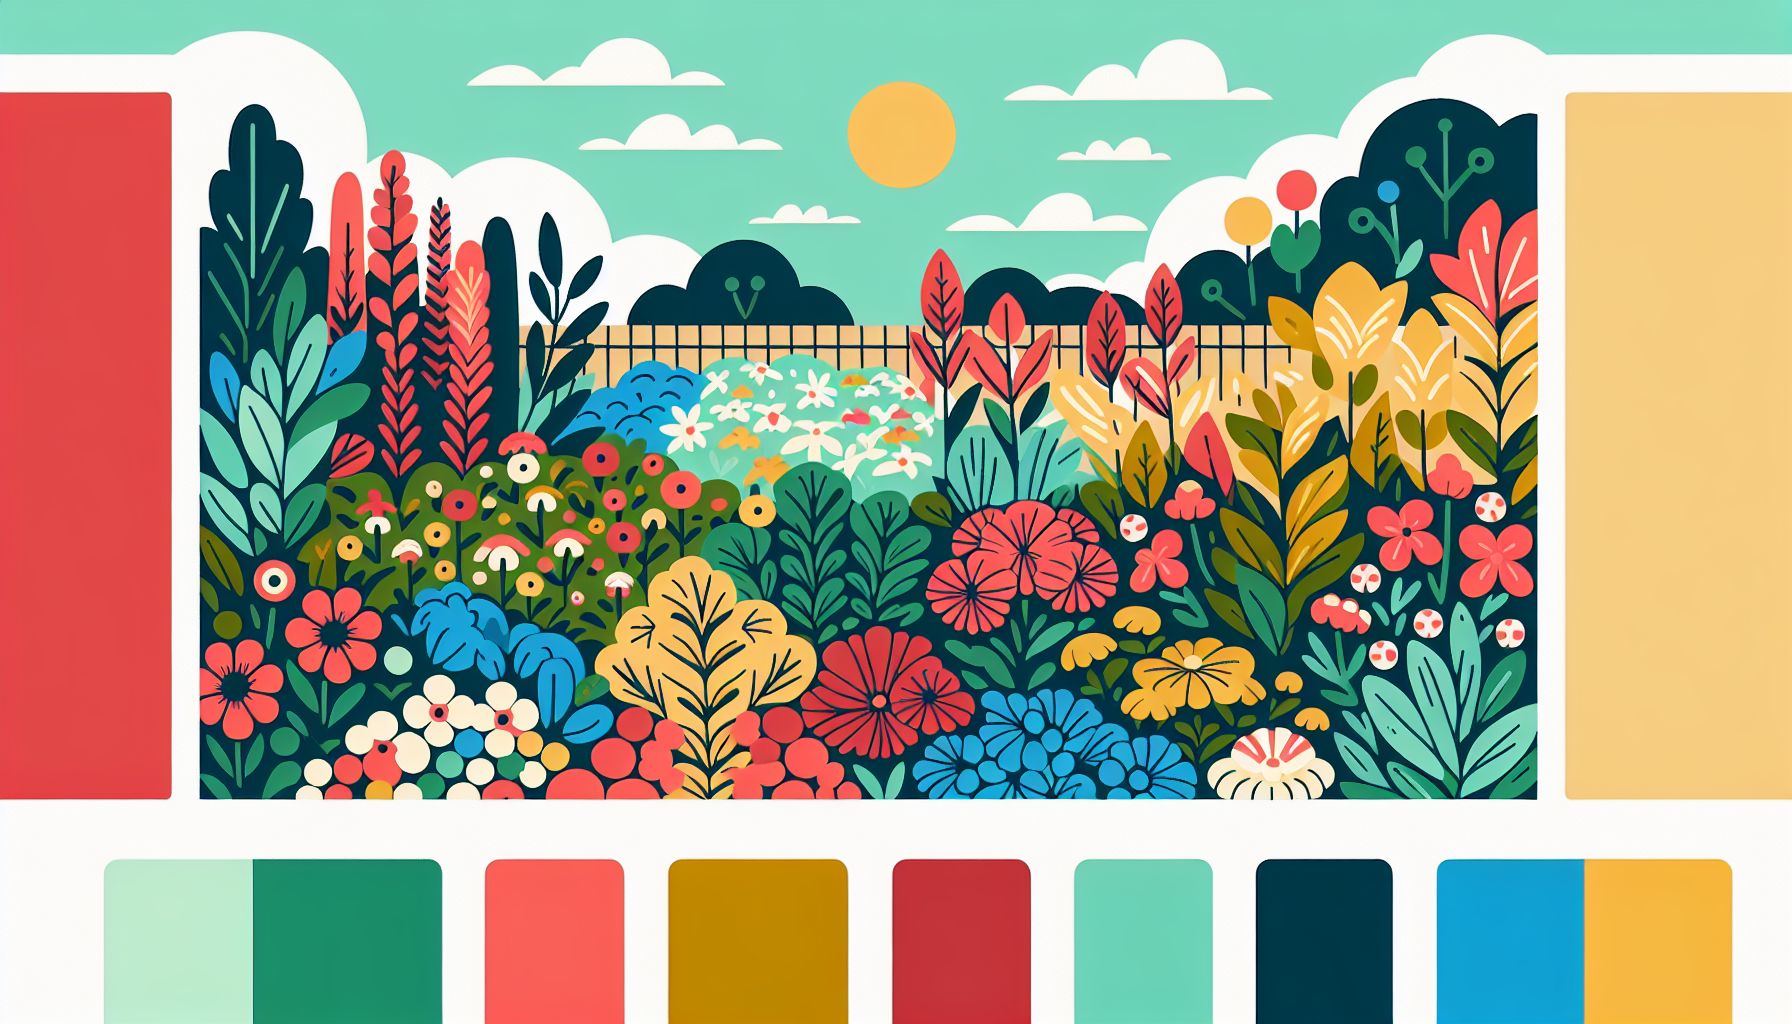 Garden in flat illustration style and white background, red #f47574, green #88c7a8, yellow #fcc44b, and blue #645bc8 colors.